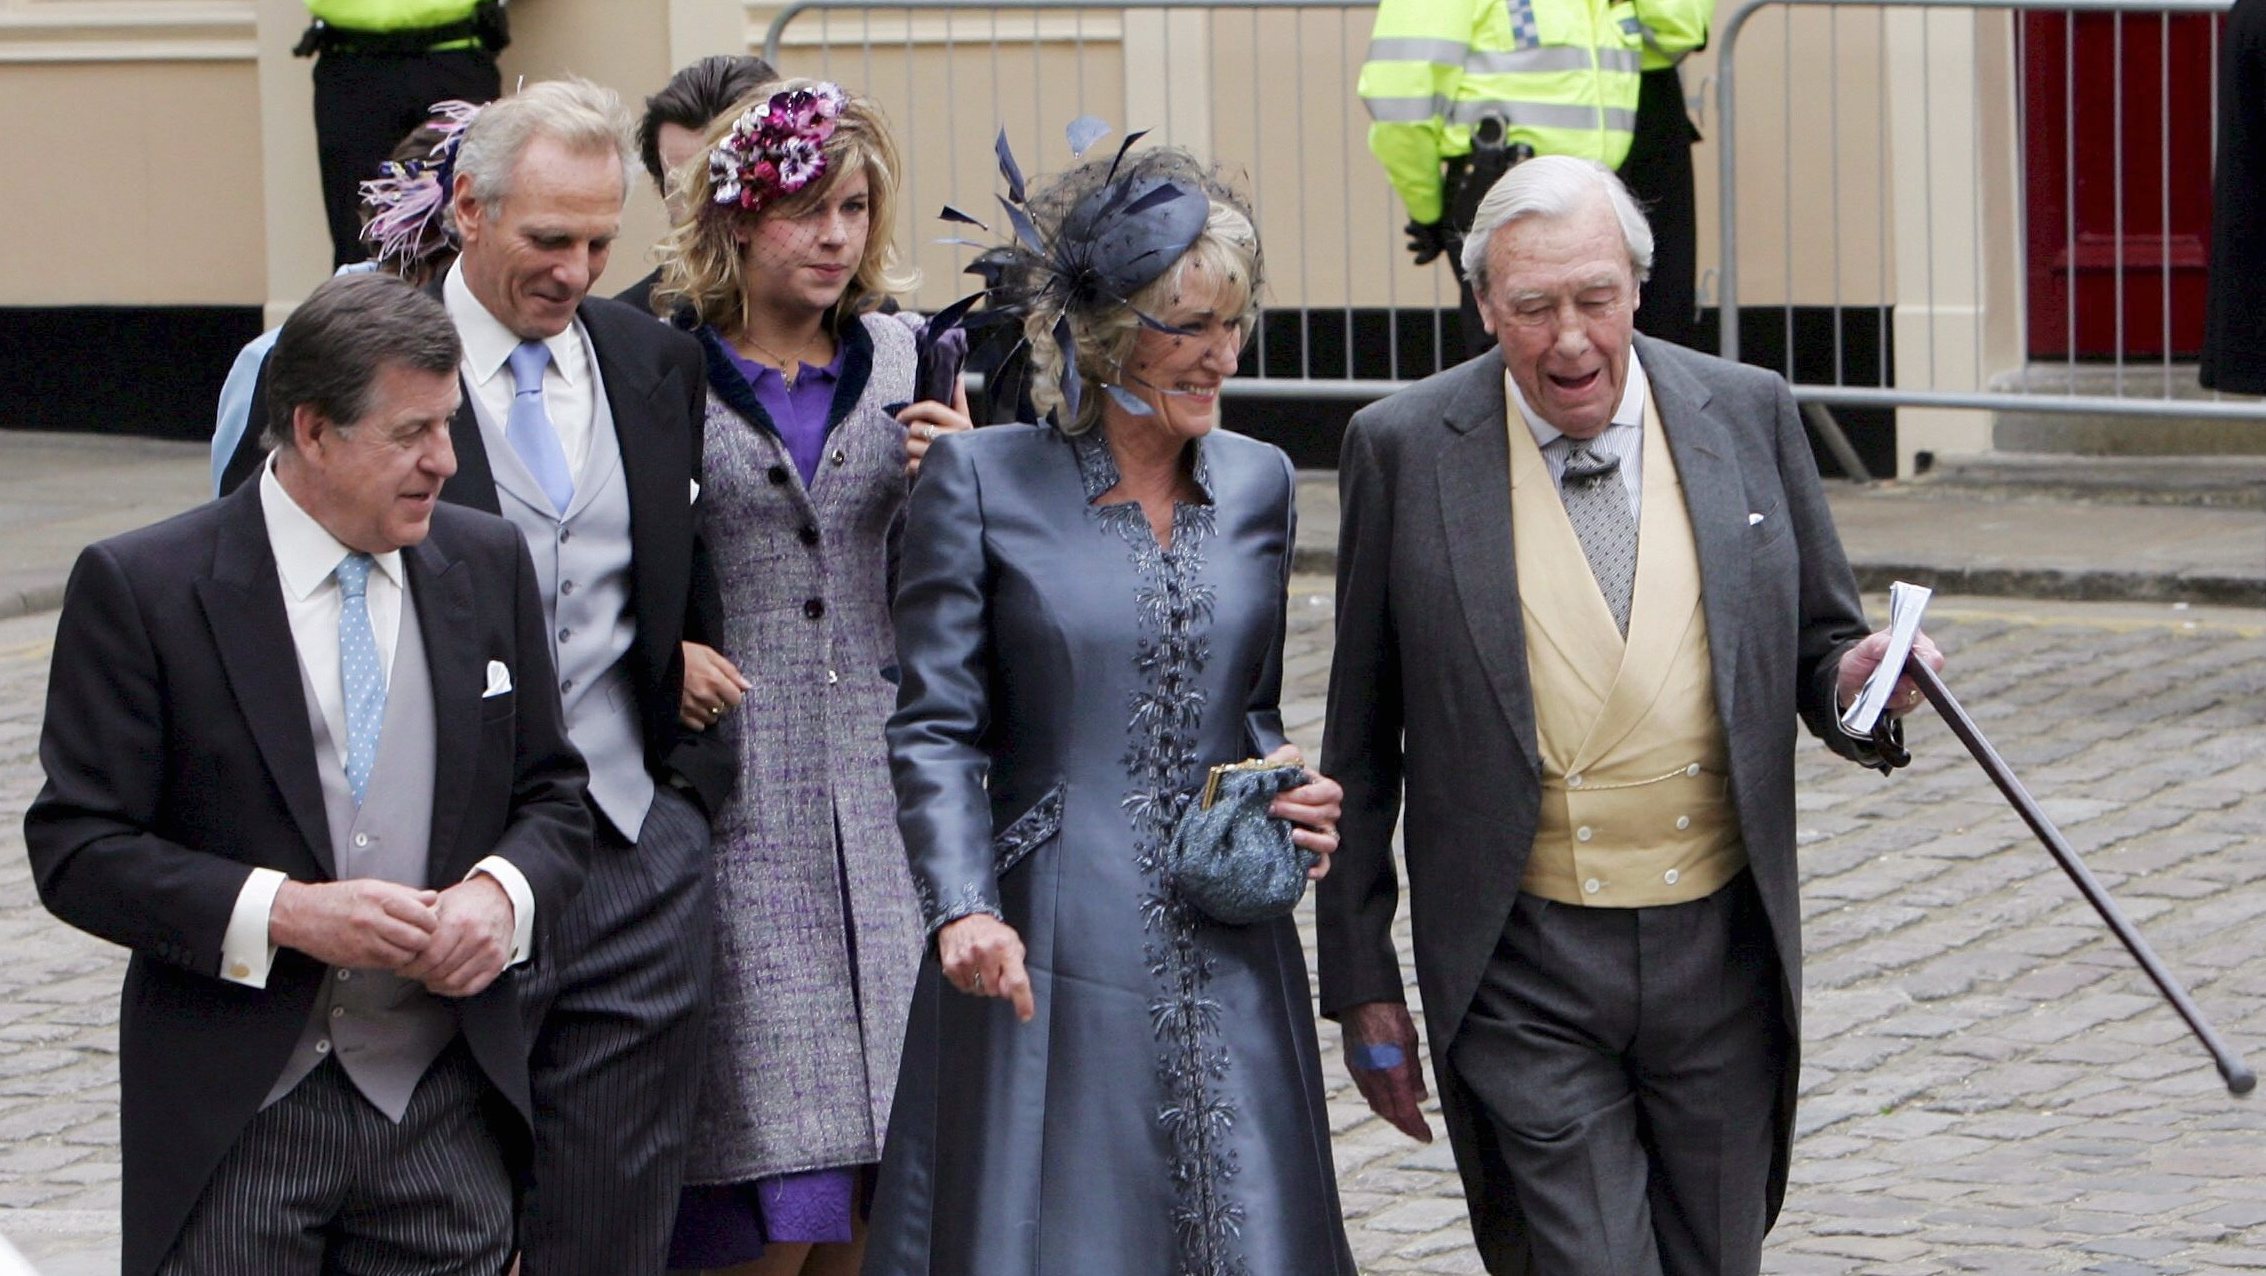 Wedding of HRH the Prince of Wales and Mrs Camilla Parker Bowles.